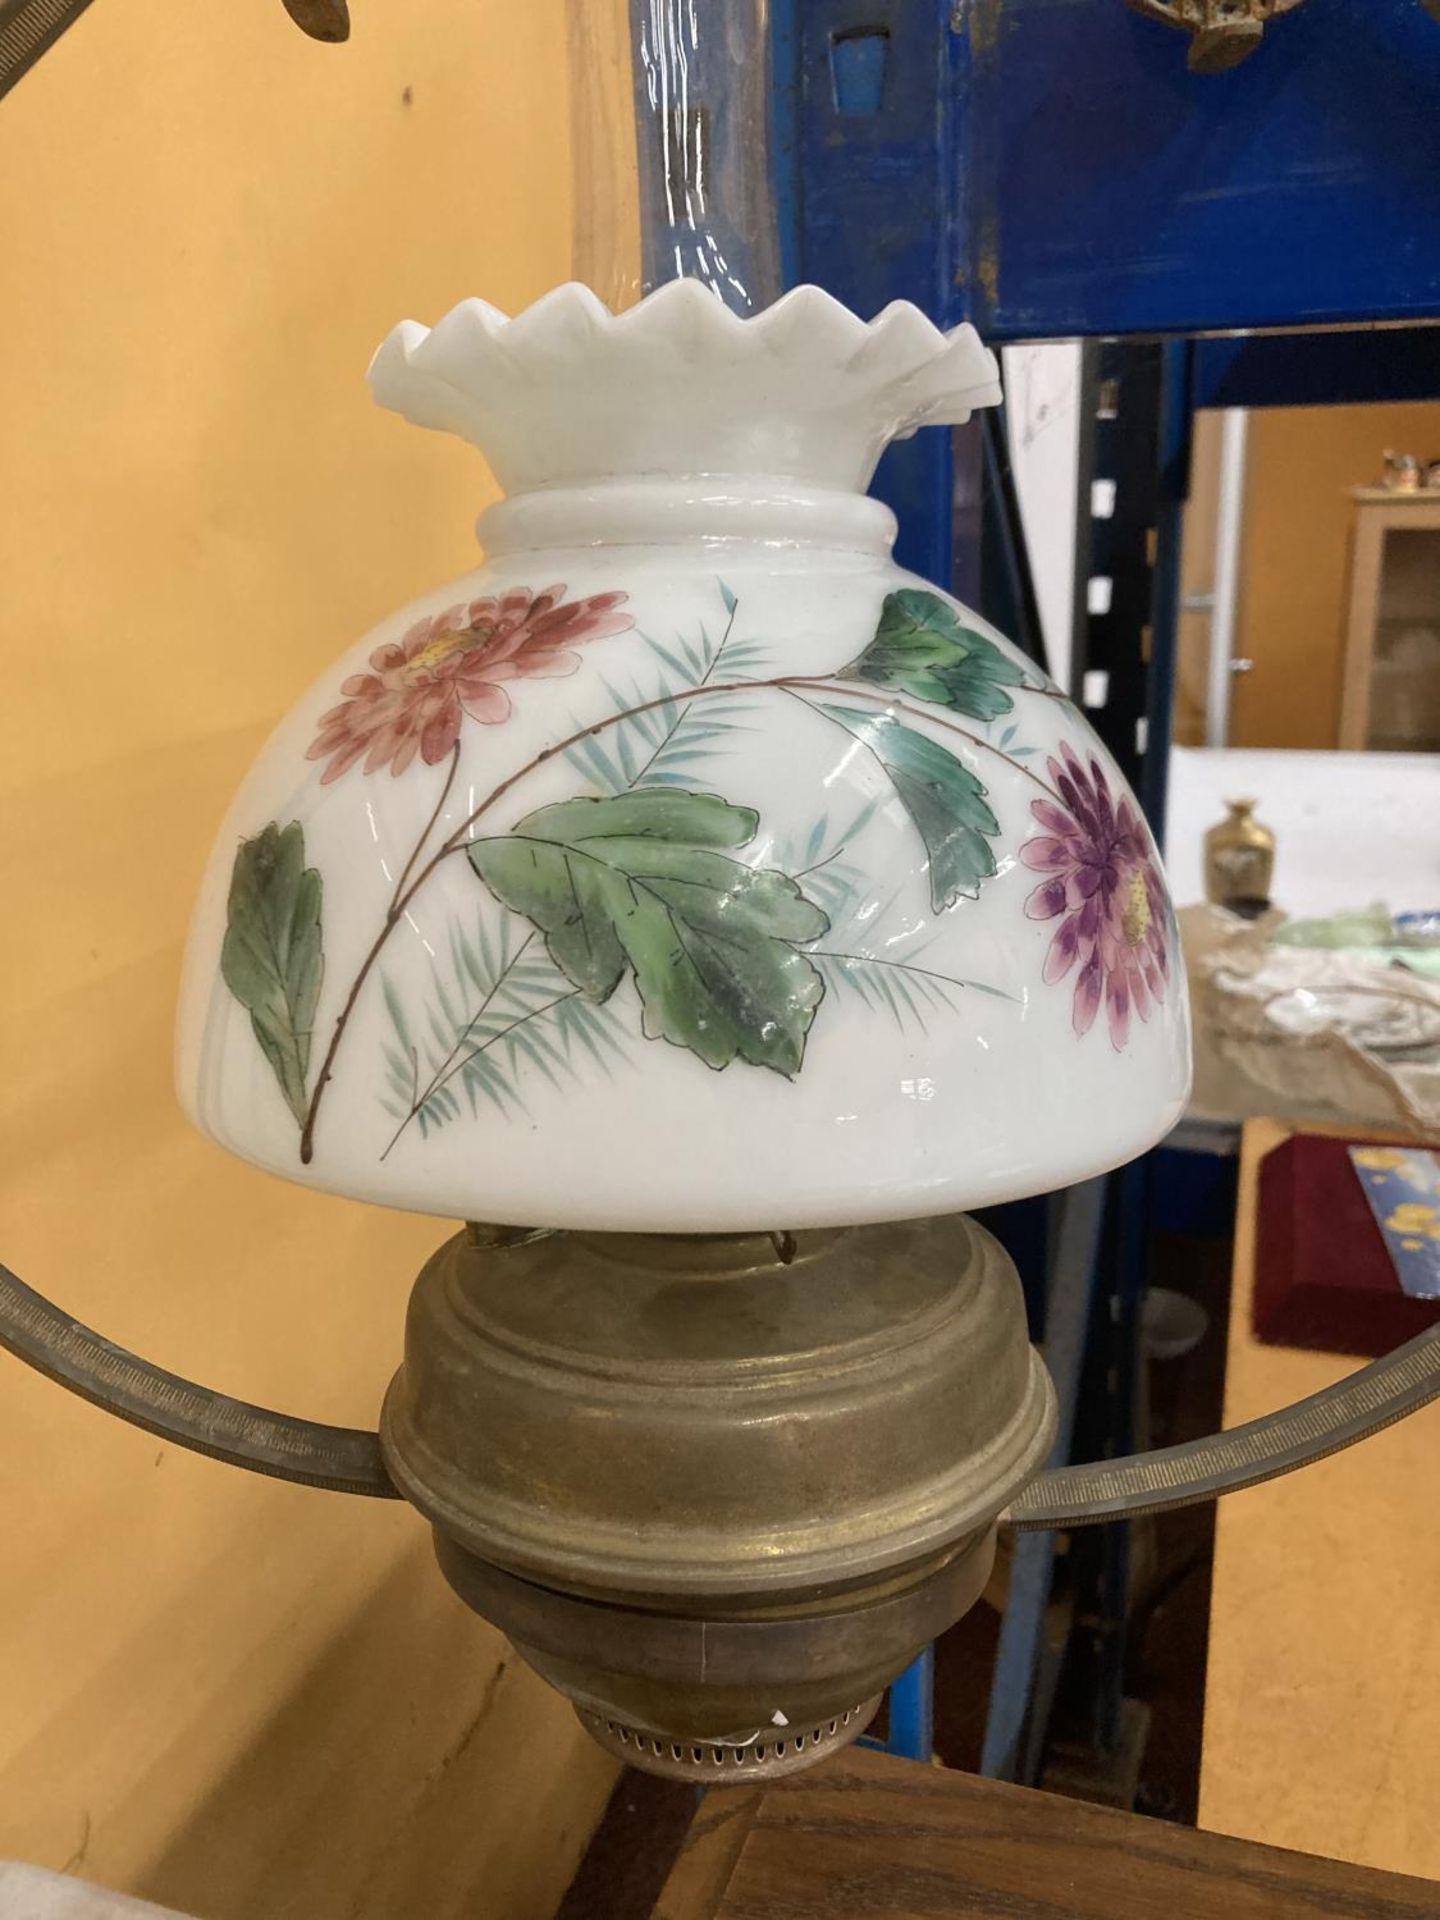 A VINTAGE HANGING OIL LAMP WITH PAINTED GLASS SHADE AND FLAMINGO DECORATION - Image 2 of 5